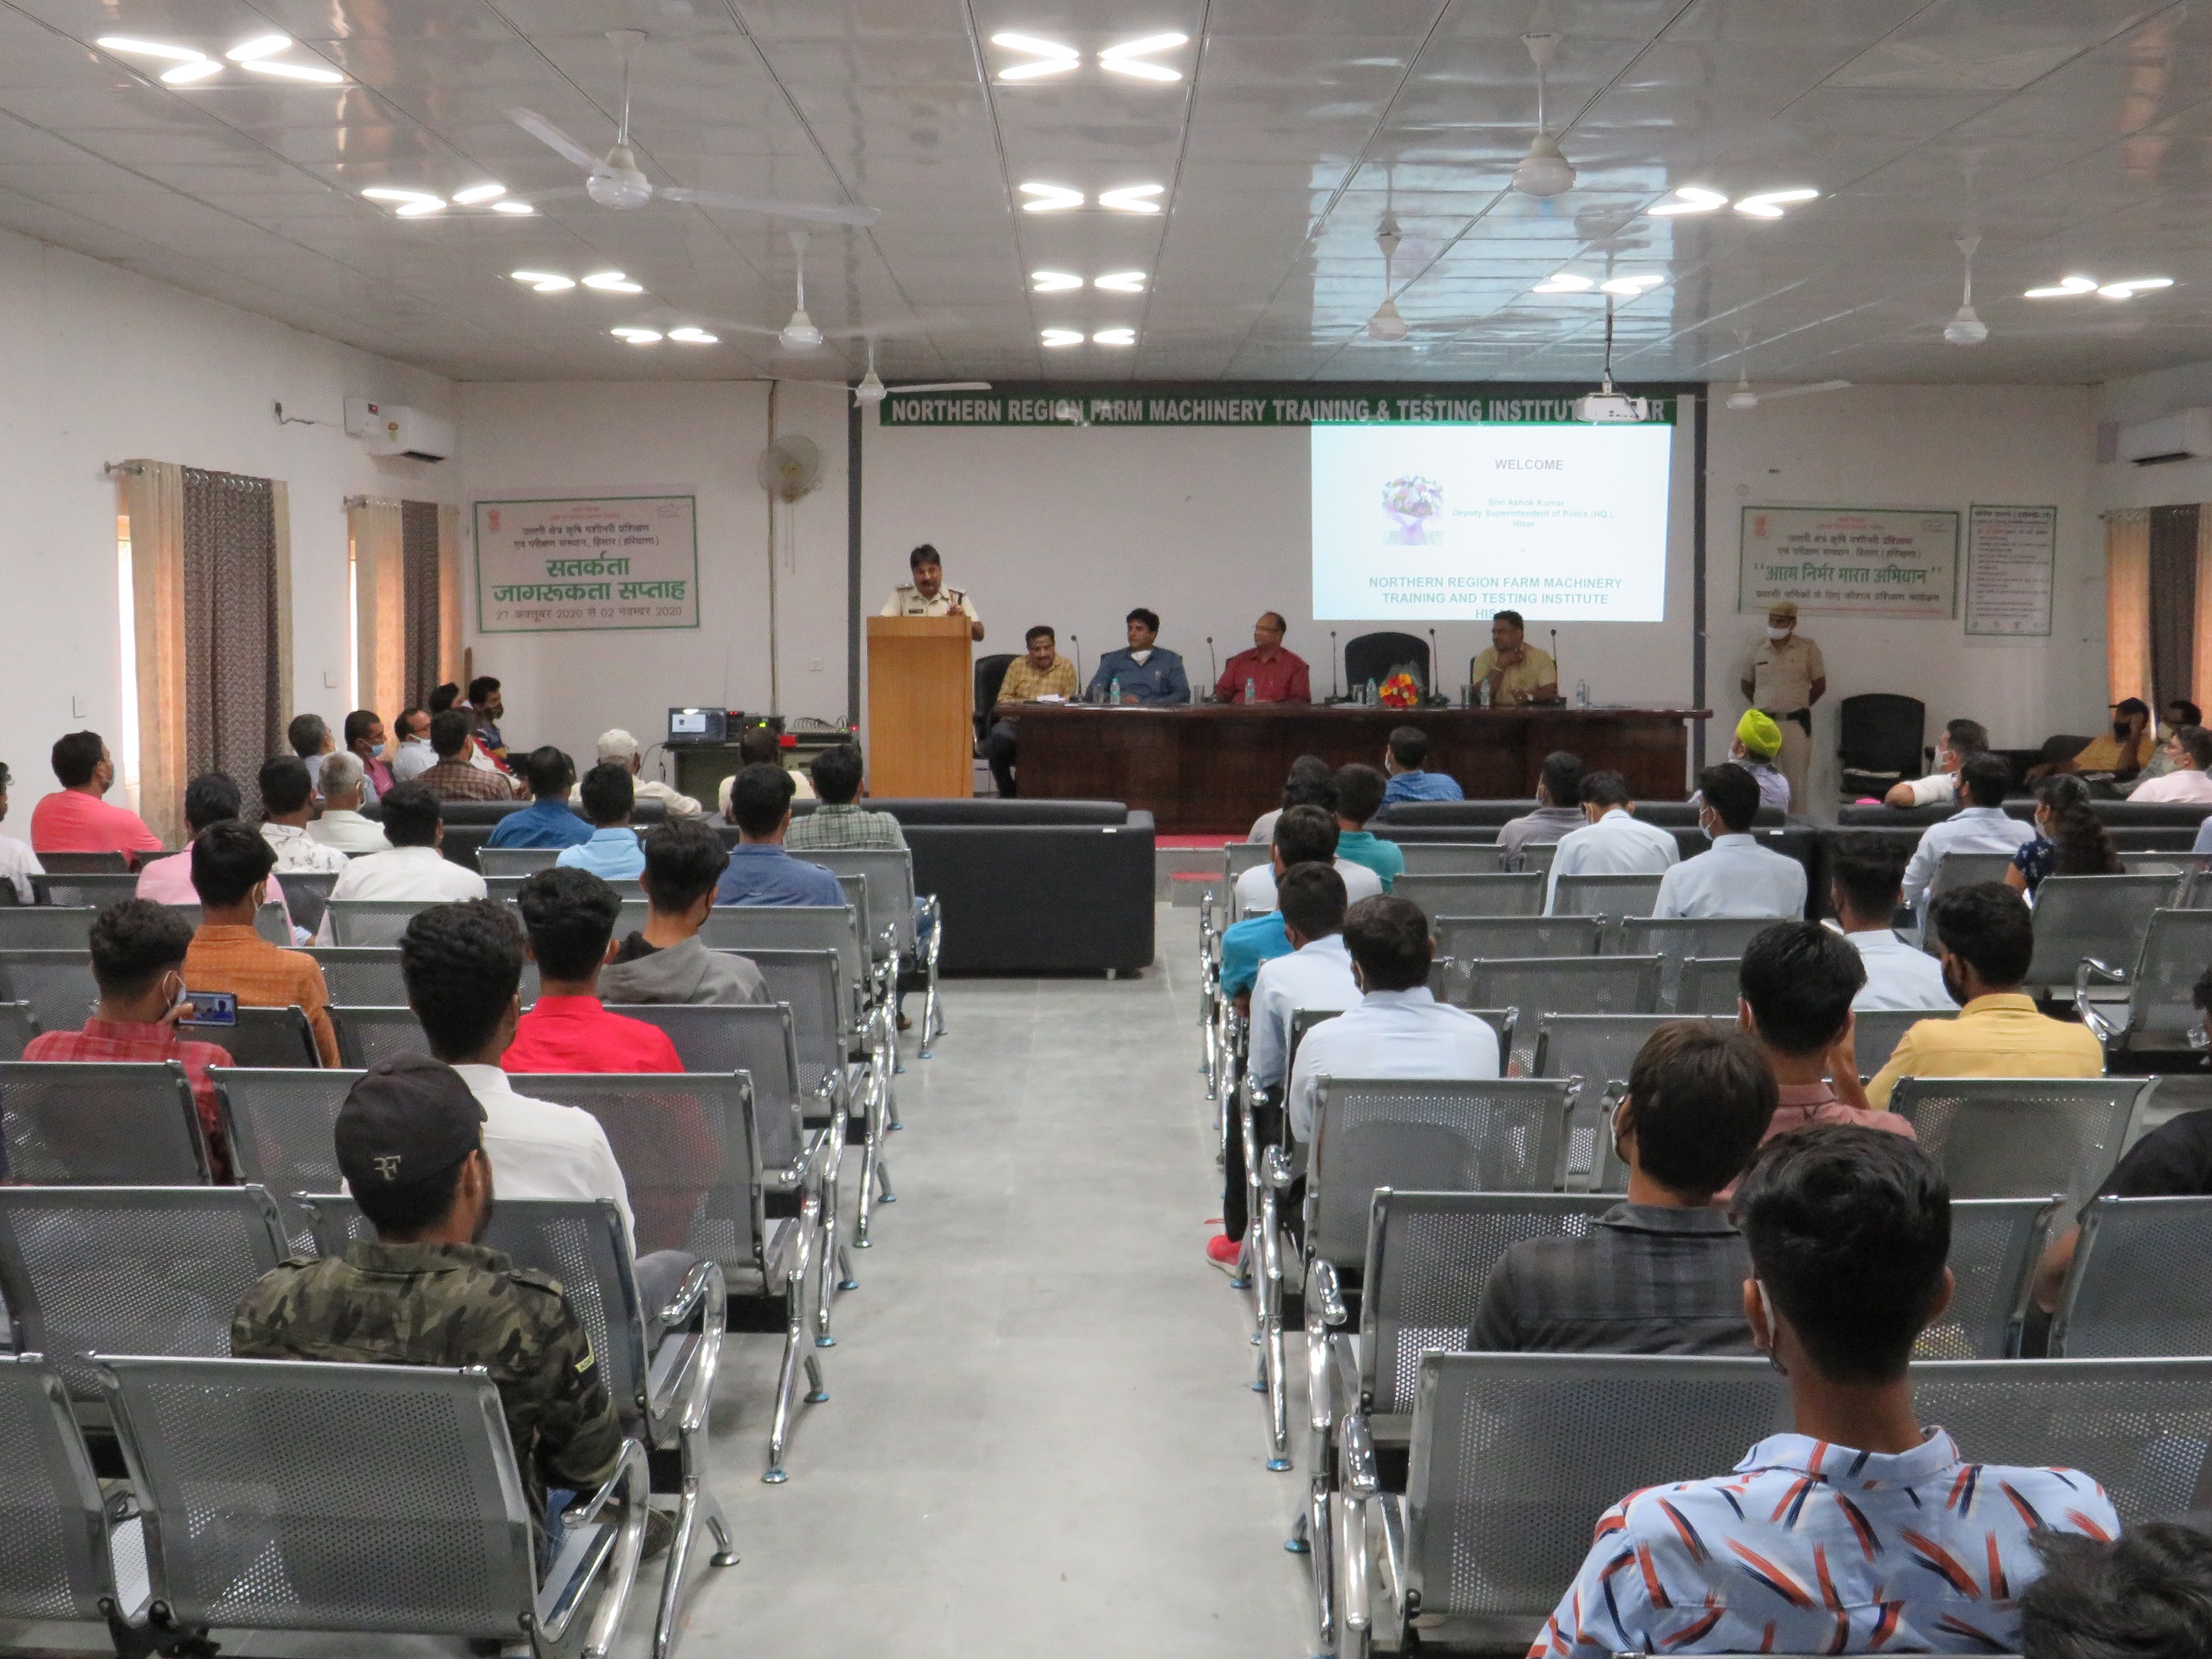 ./writereaddata/CImages/Chief guest of the function Sh. Ashok Kumar, DSP encouraging the trainees.JPG